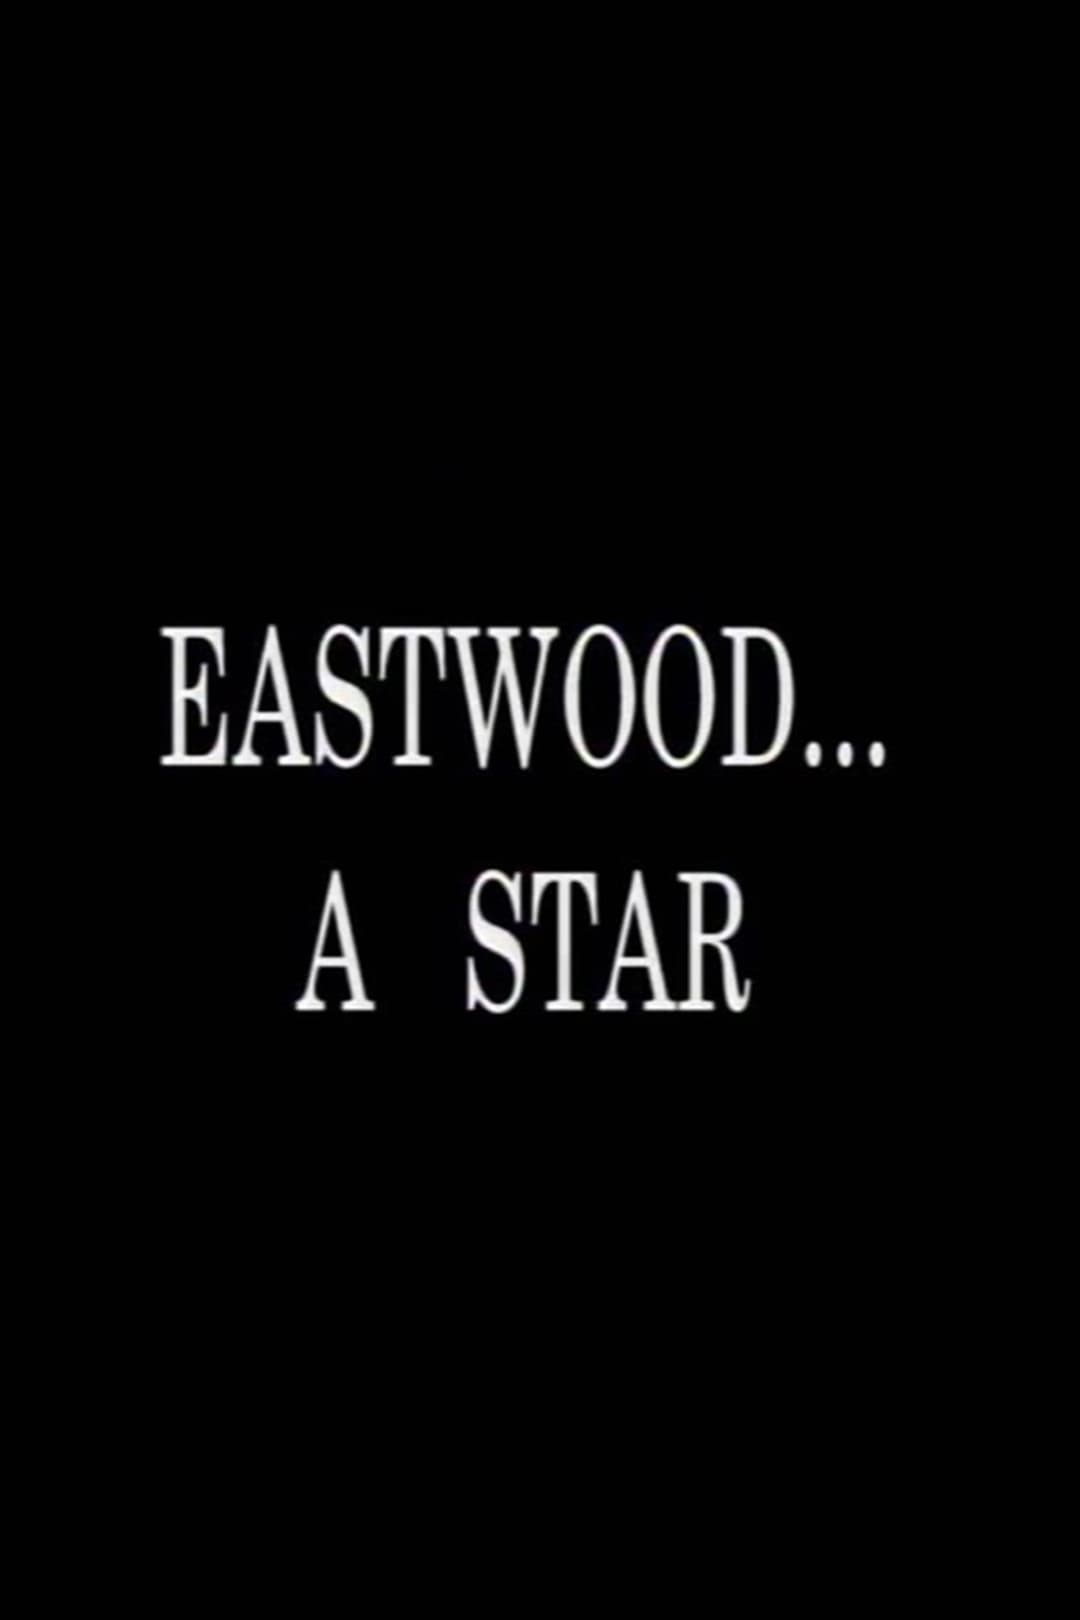 Eastwood... A Star